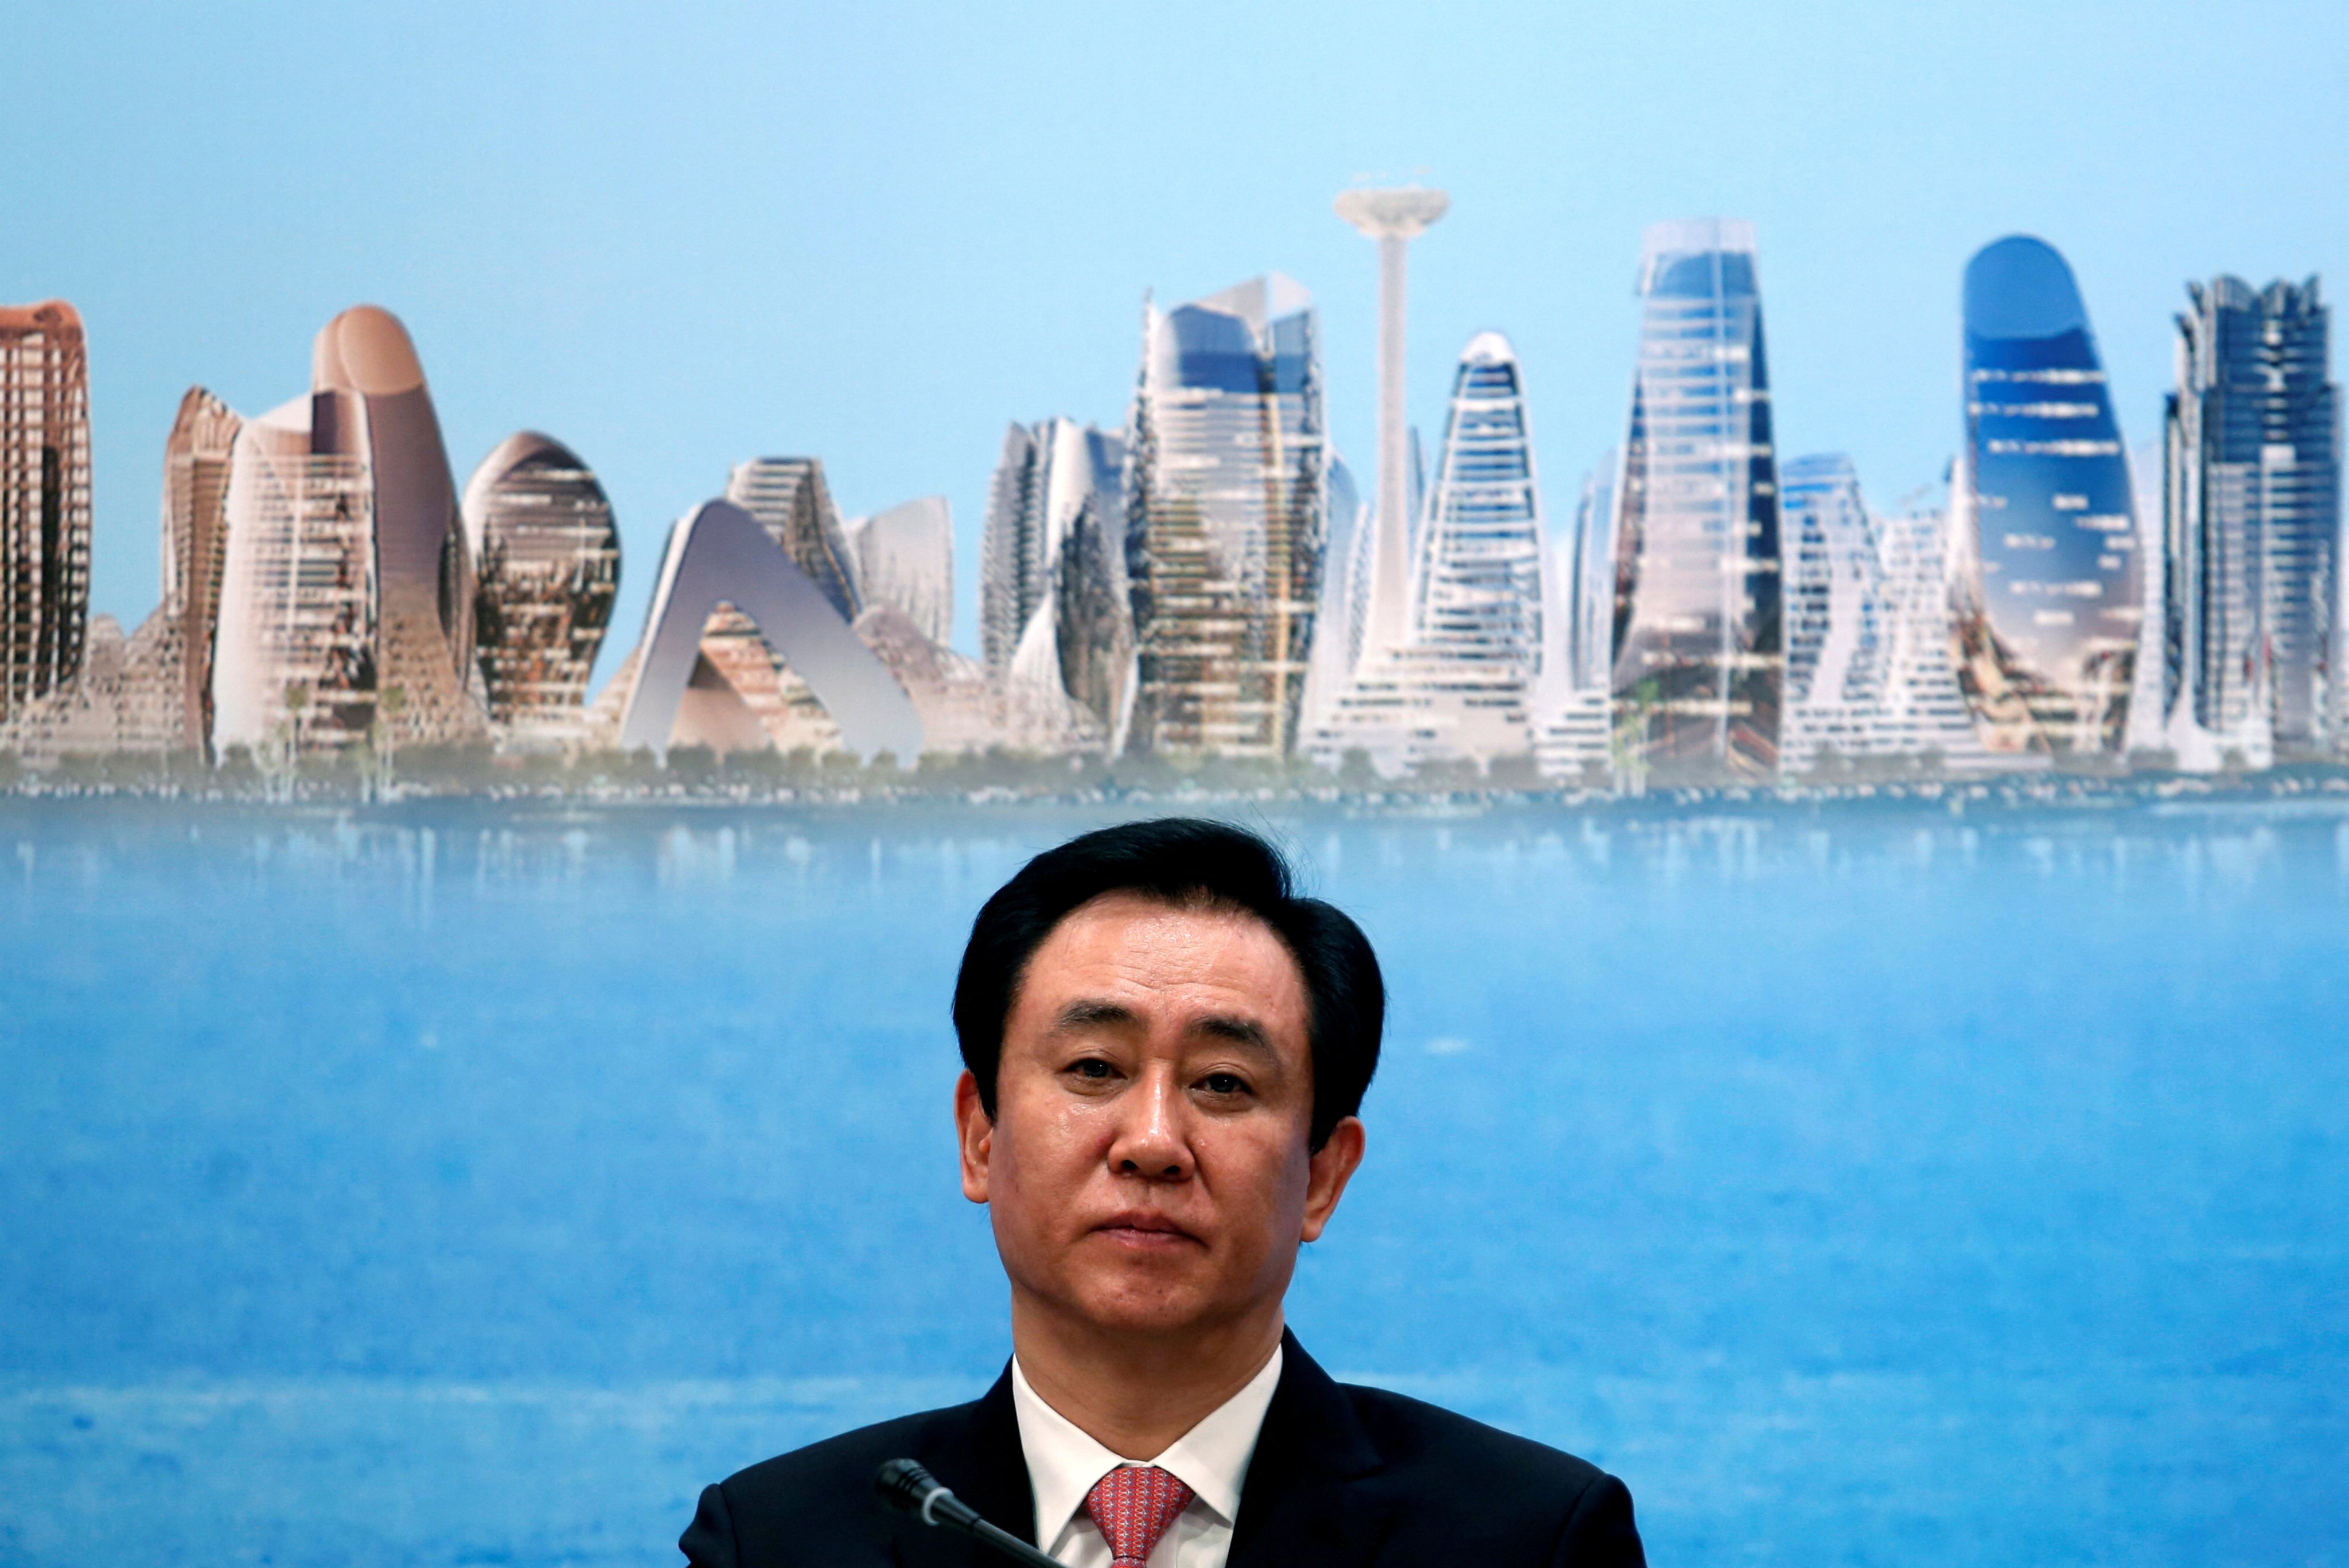 China Evergrande Group Chairman Hui Ka Yan attends a press conference on the property developer’s annual results in Hong Kong on March 28, 2017. Photo: Reuters